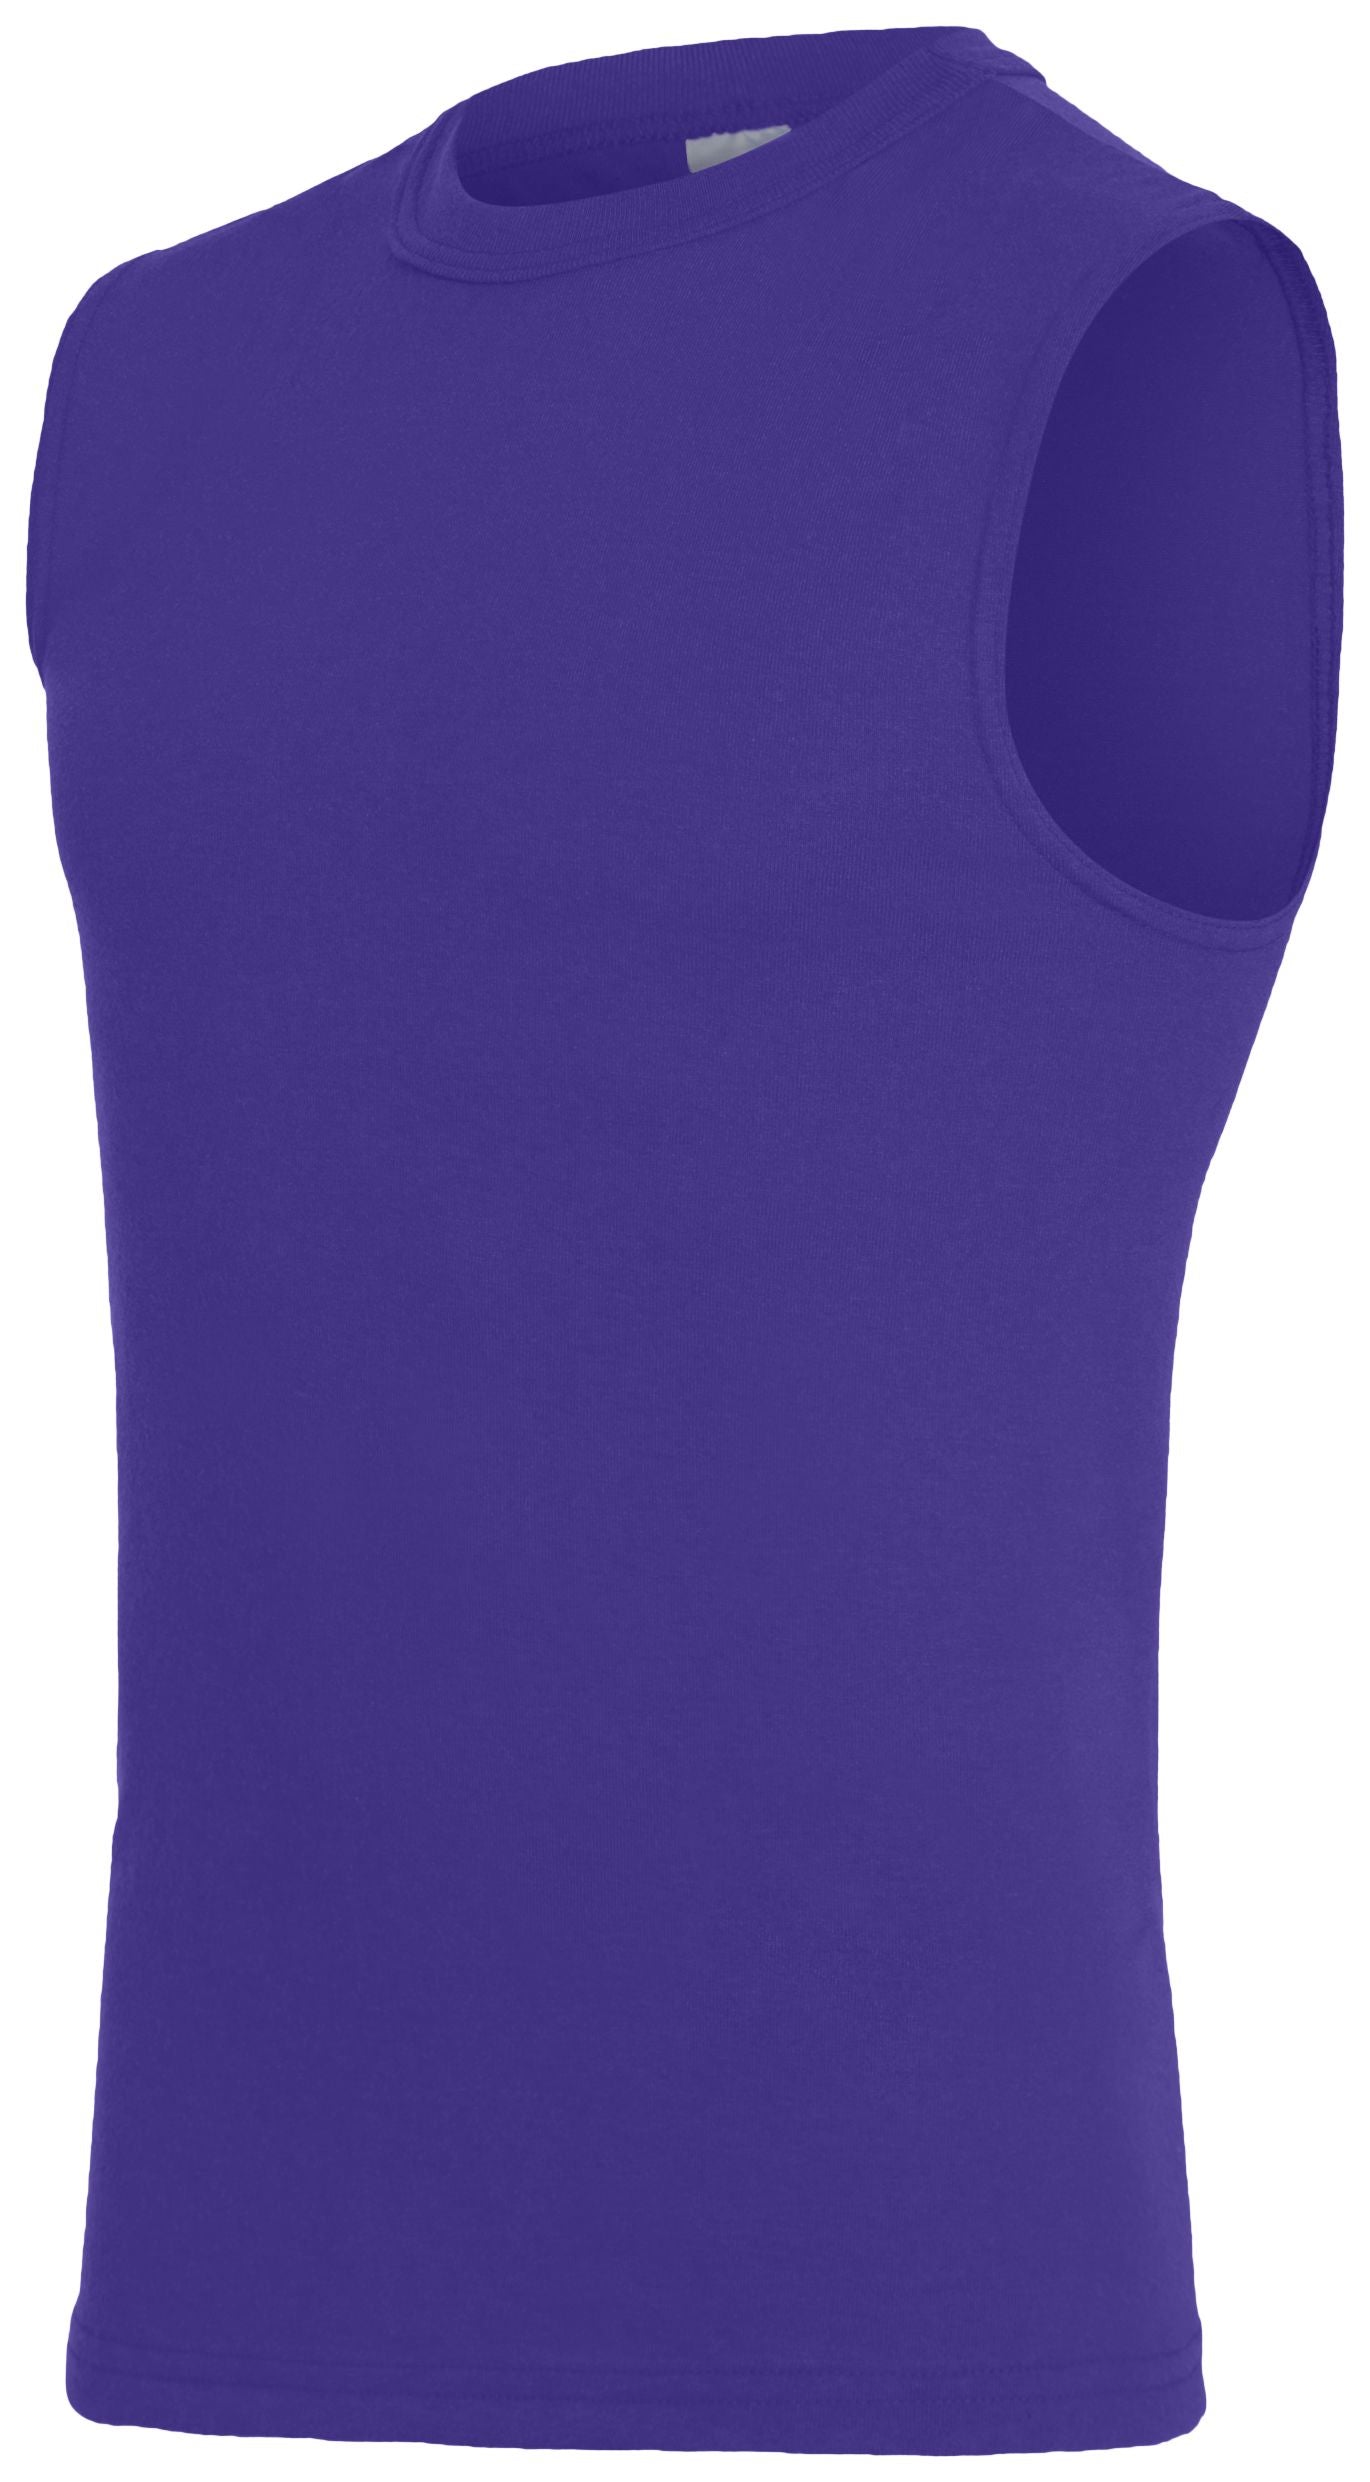 Augusta Sportswear Youth Shooter Shirt in Purple  -Part of the Youth, Youth-Jersey, Augusta-Products, Shirts product lines at KanaleyCreations.com